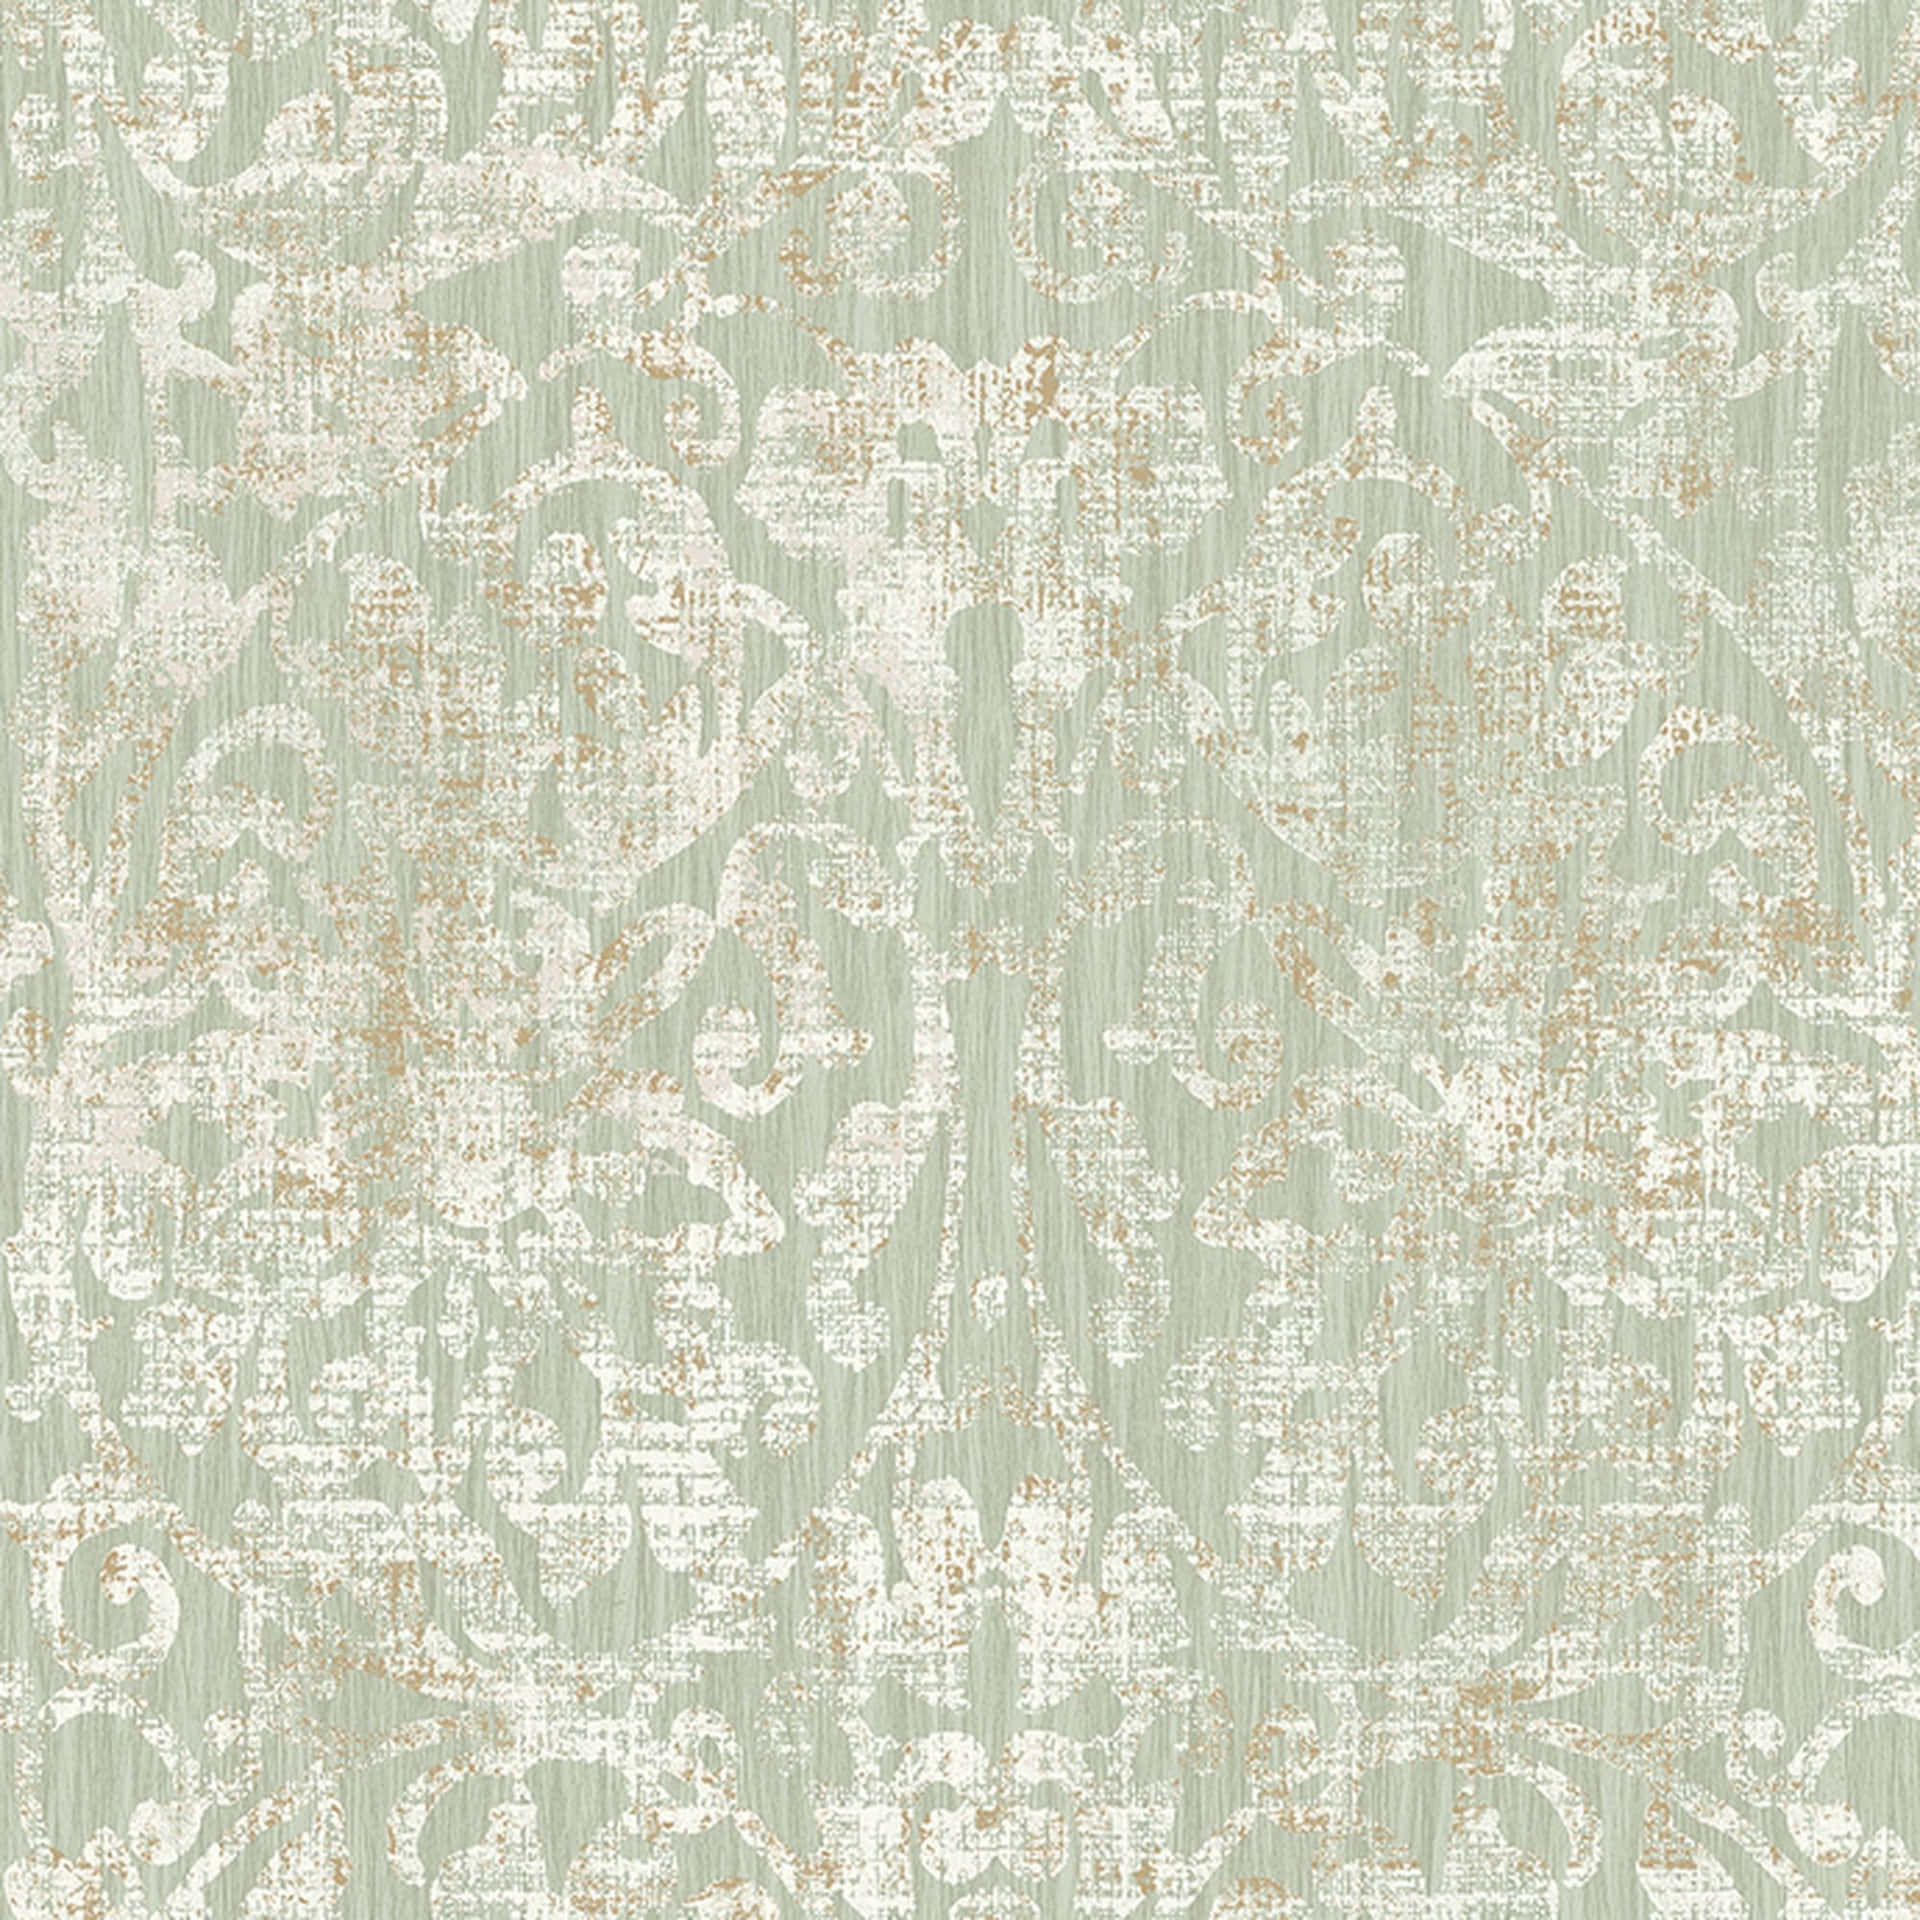 A light sage green background radiating serenity and balance.